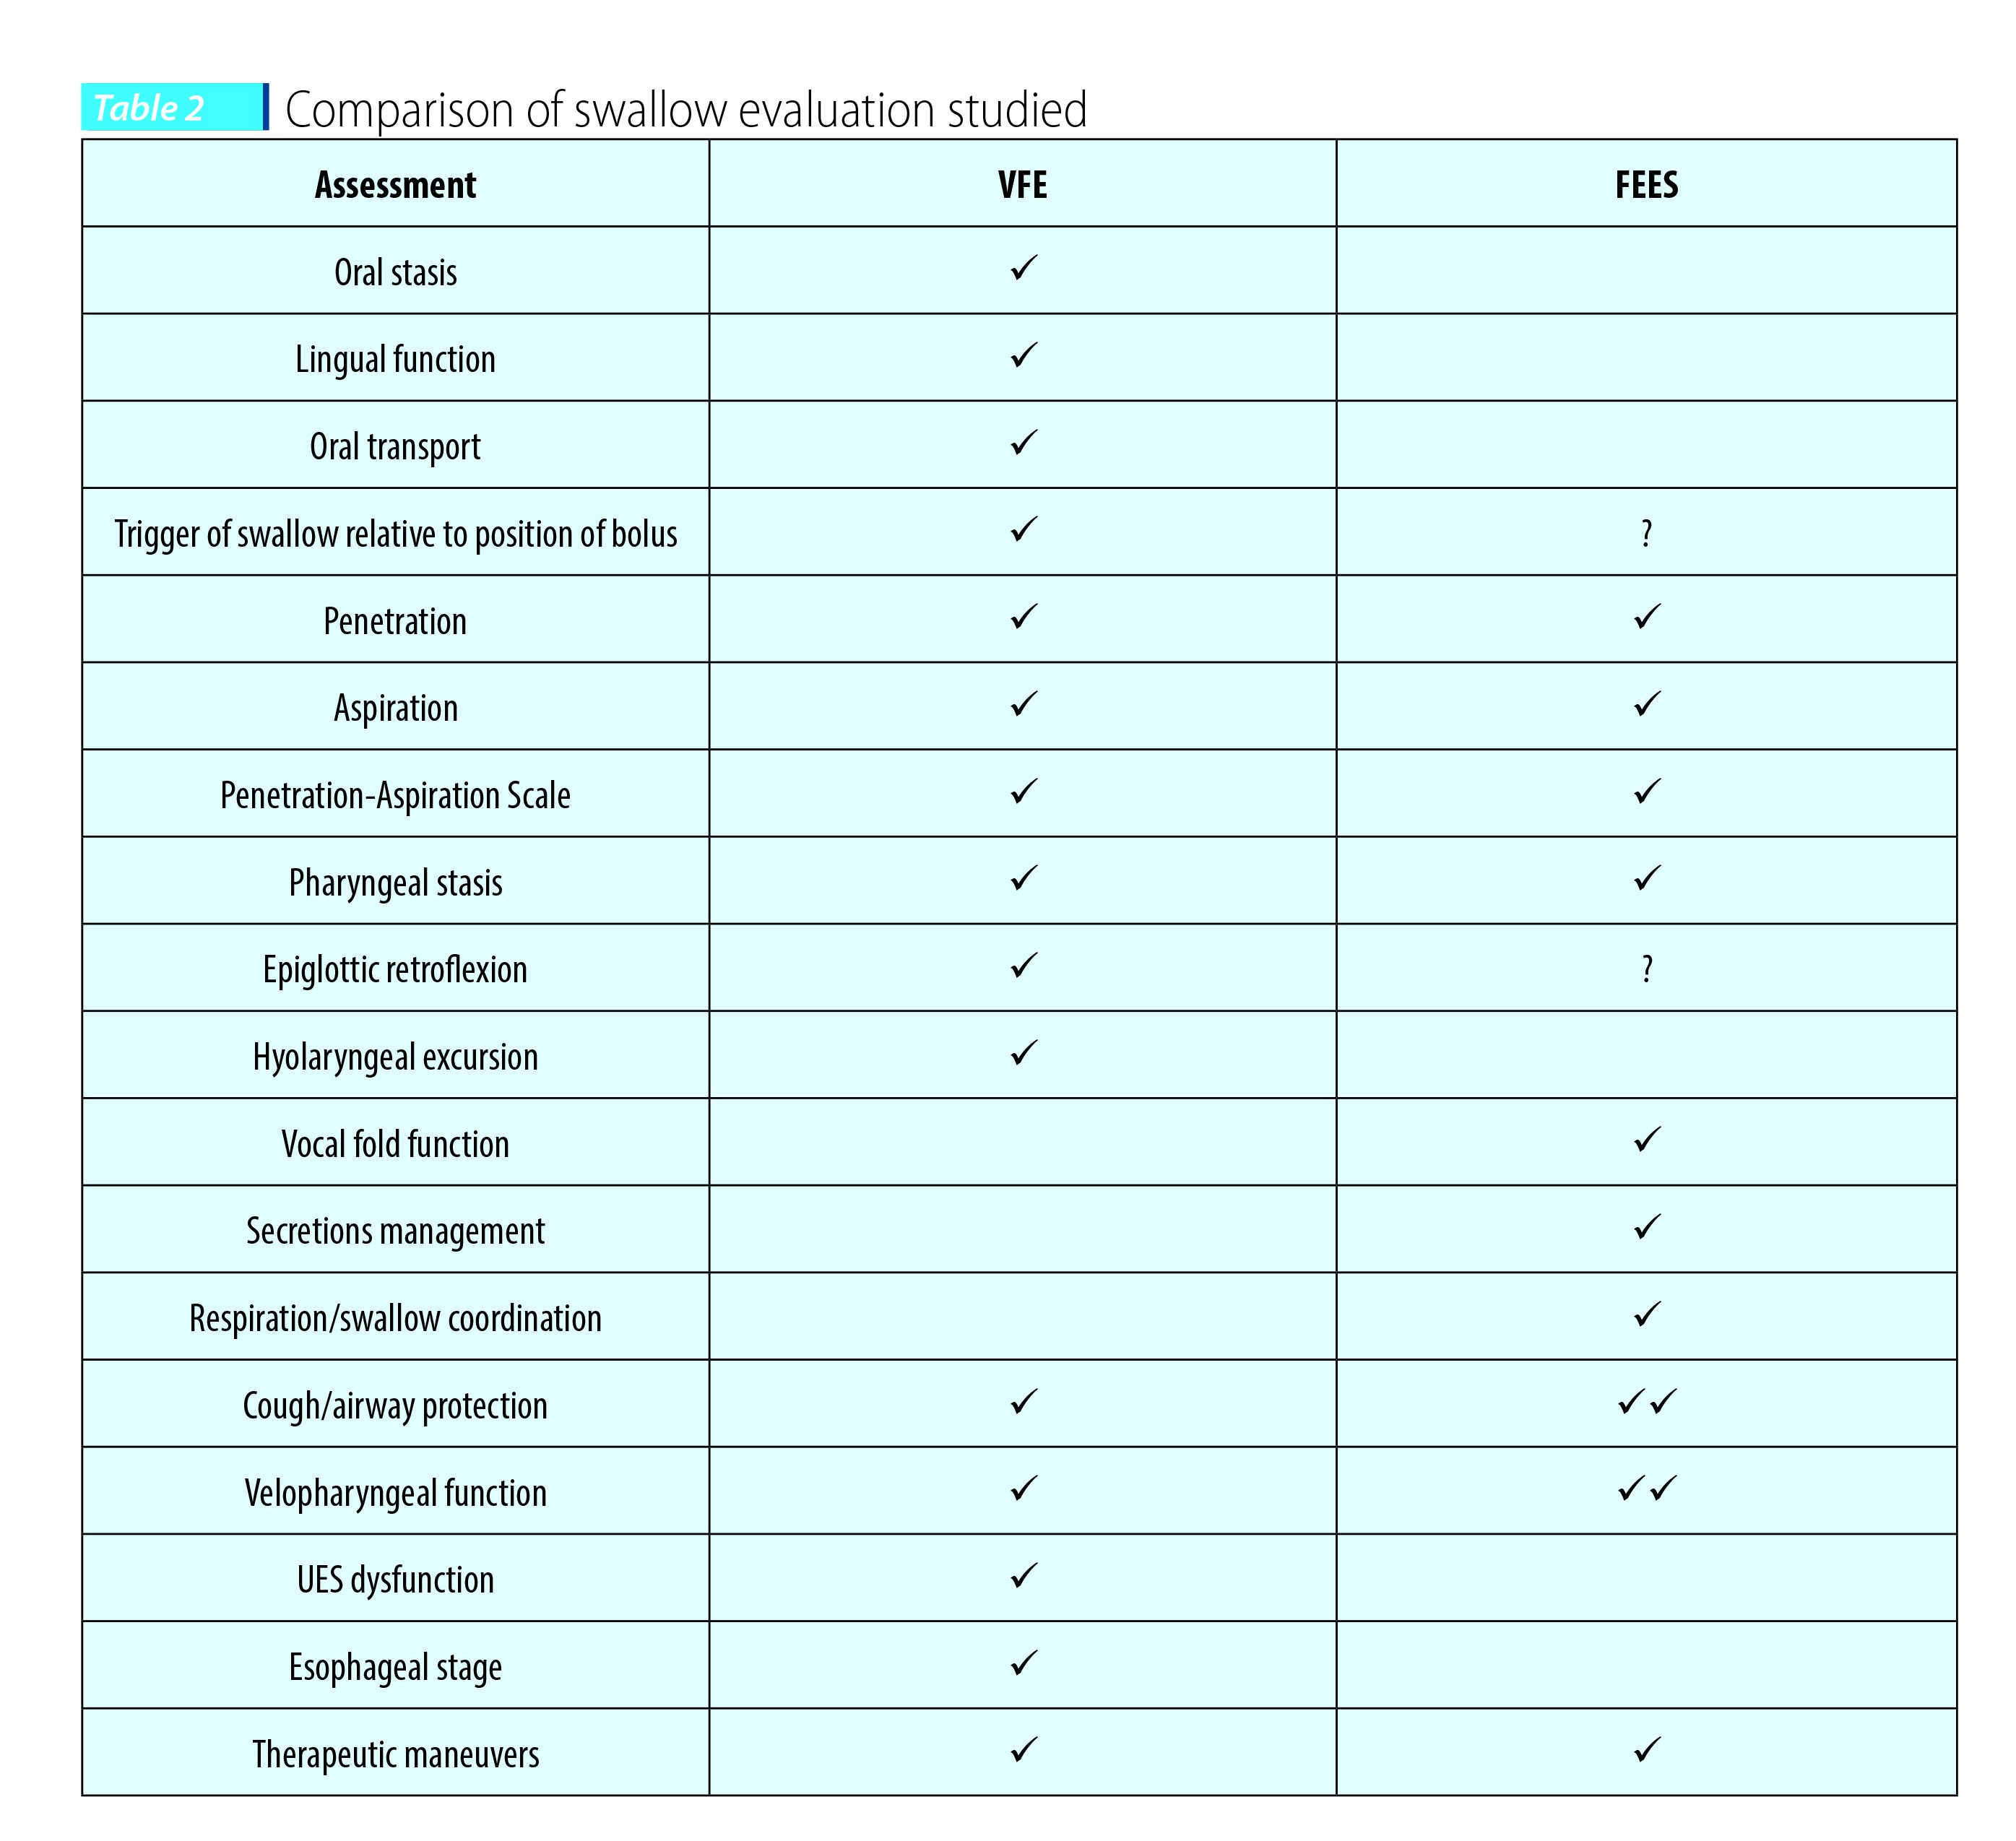 Table 2. Comparison of swallow evaluation studied